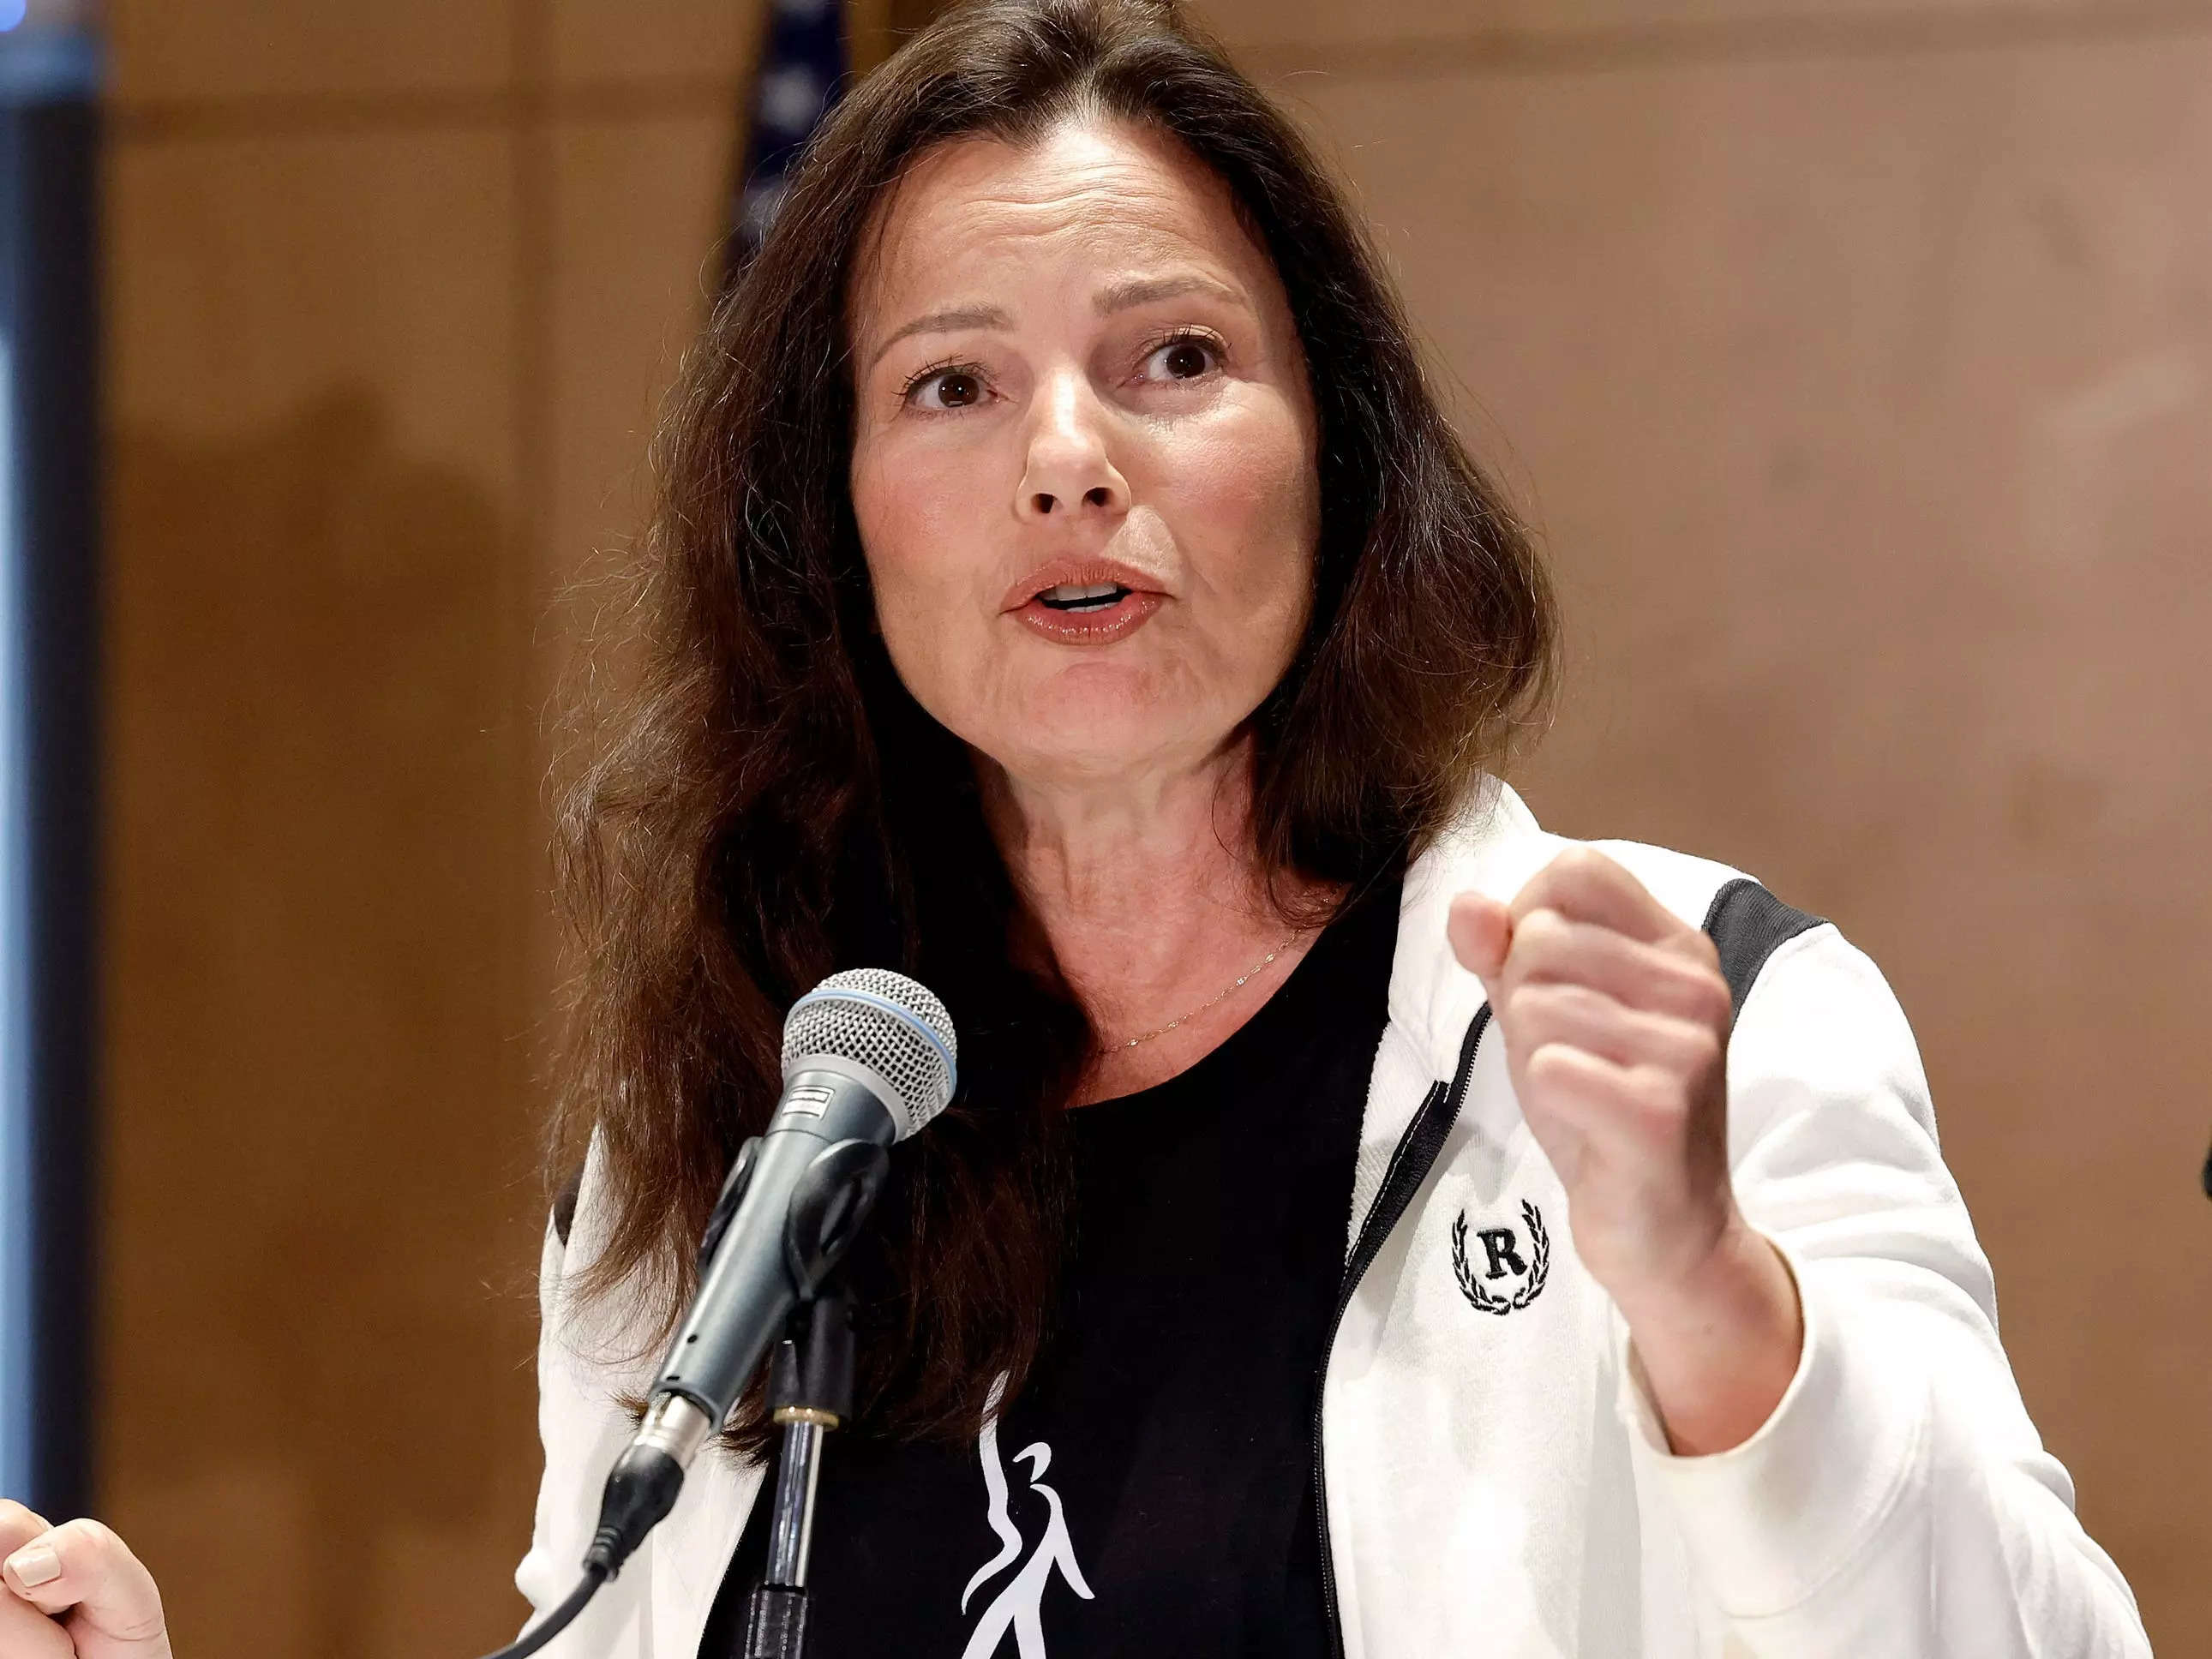 Fran Drescher speaks at a microphone on a podium, wearing a white jacket, with her fist raised.